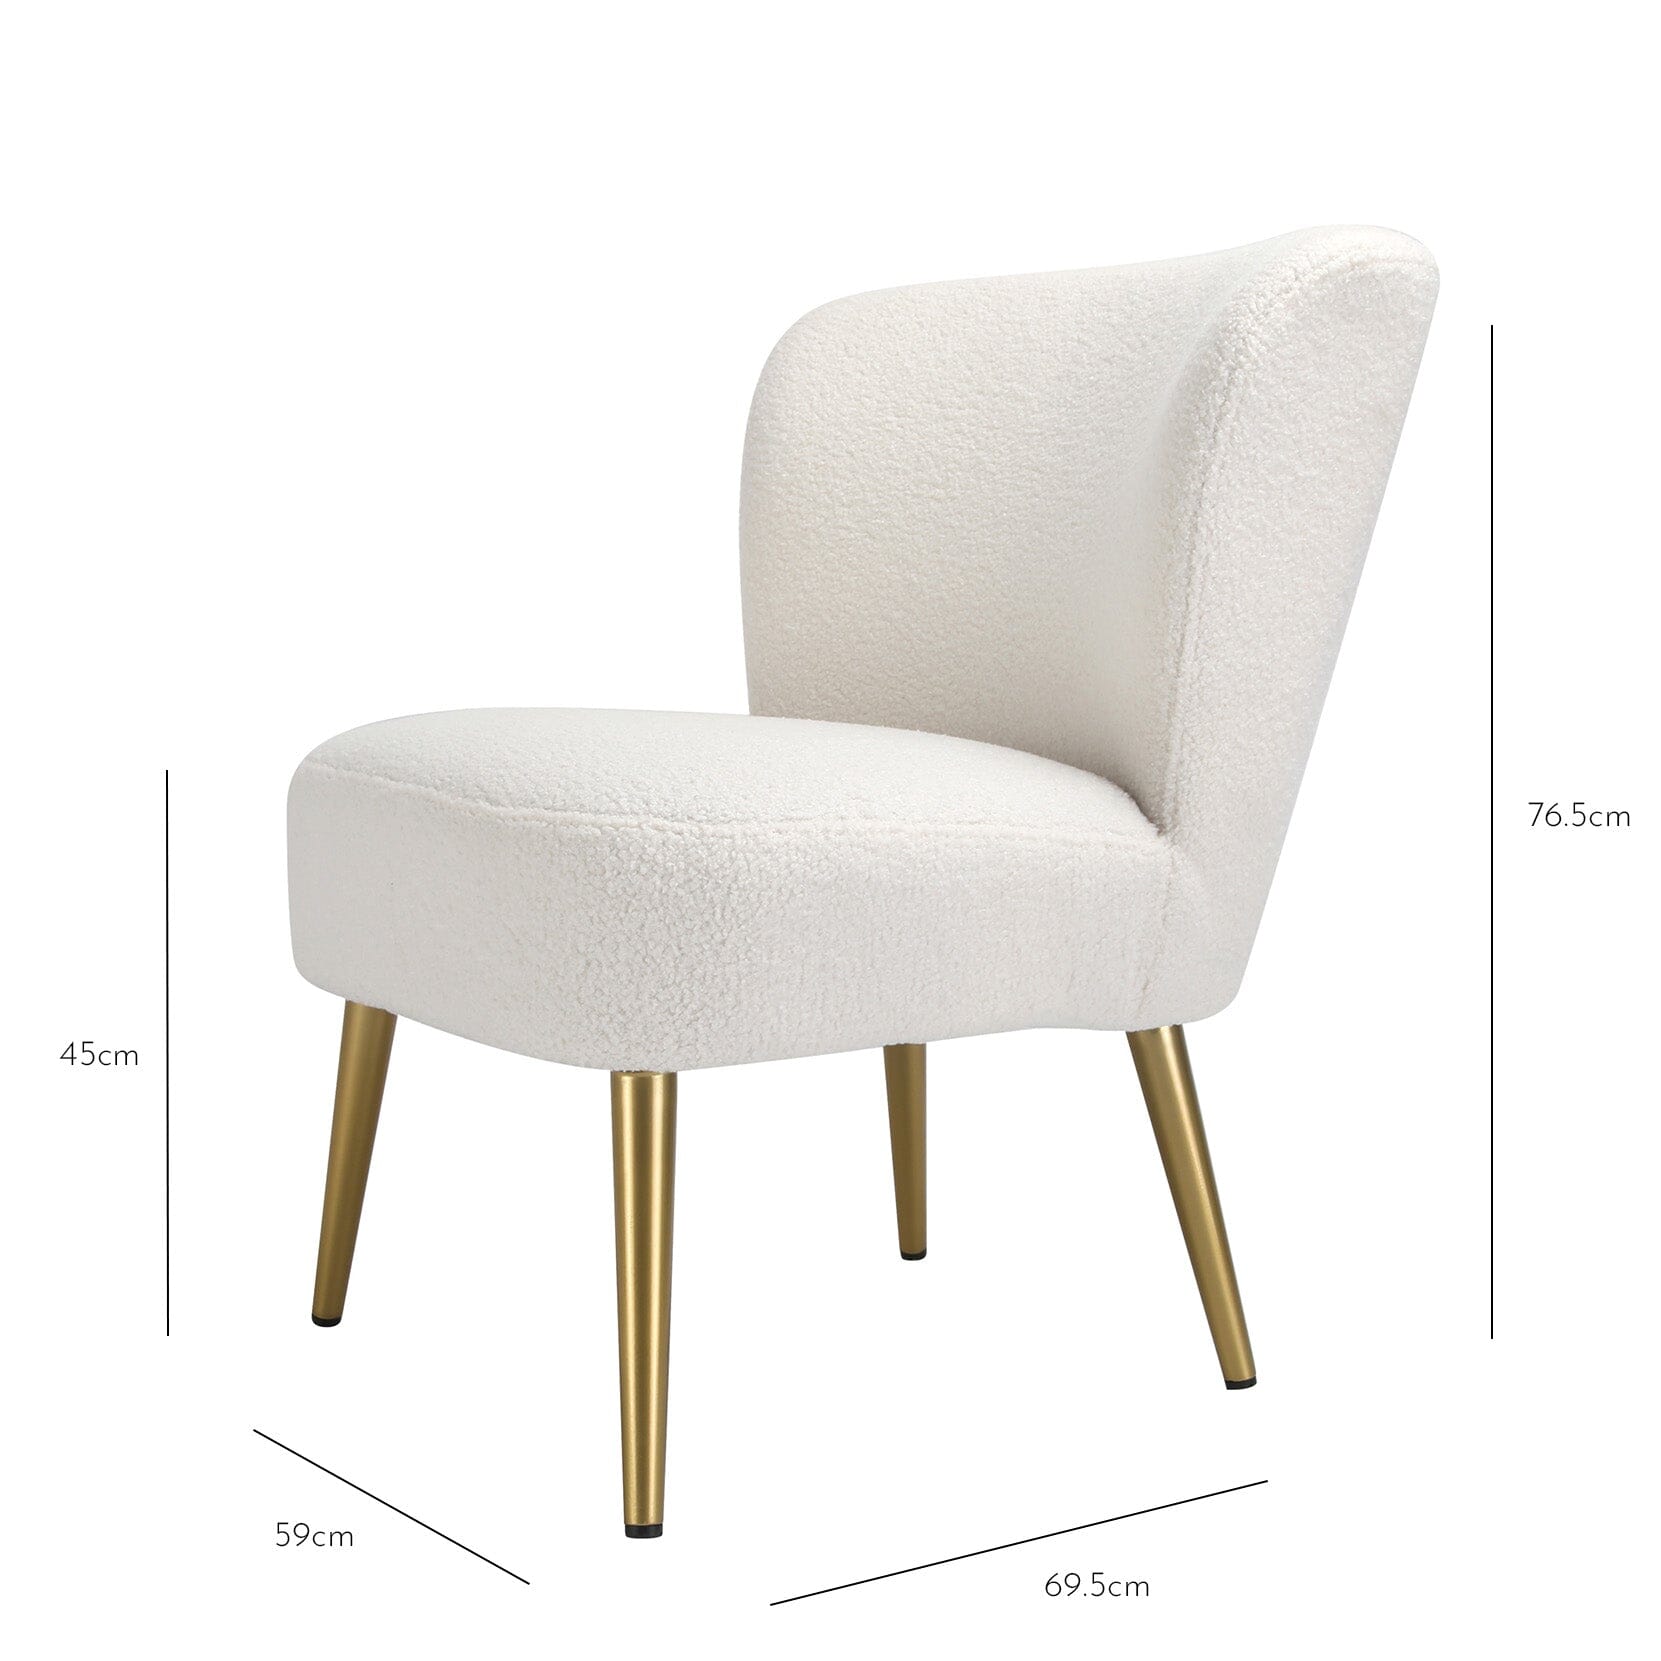 Hattie accent chair - cream boucle with gold legs - Laura James